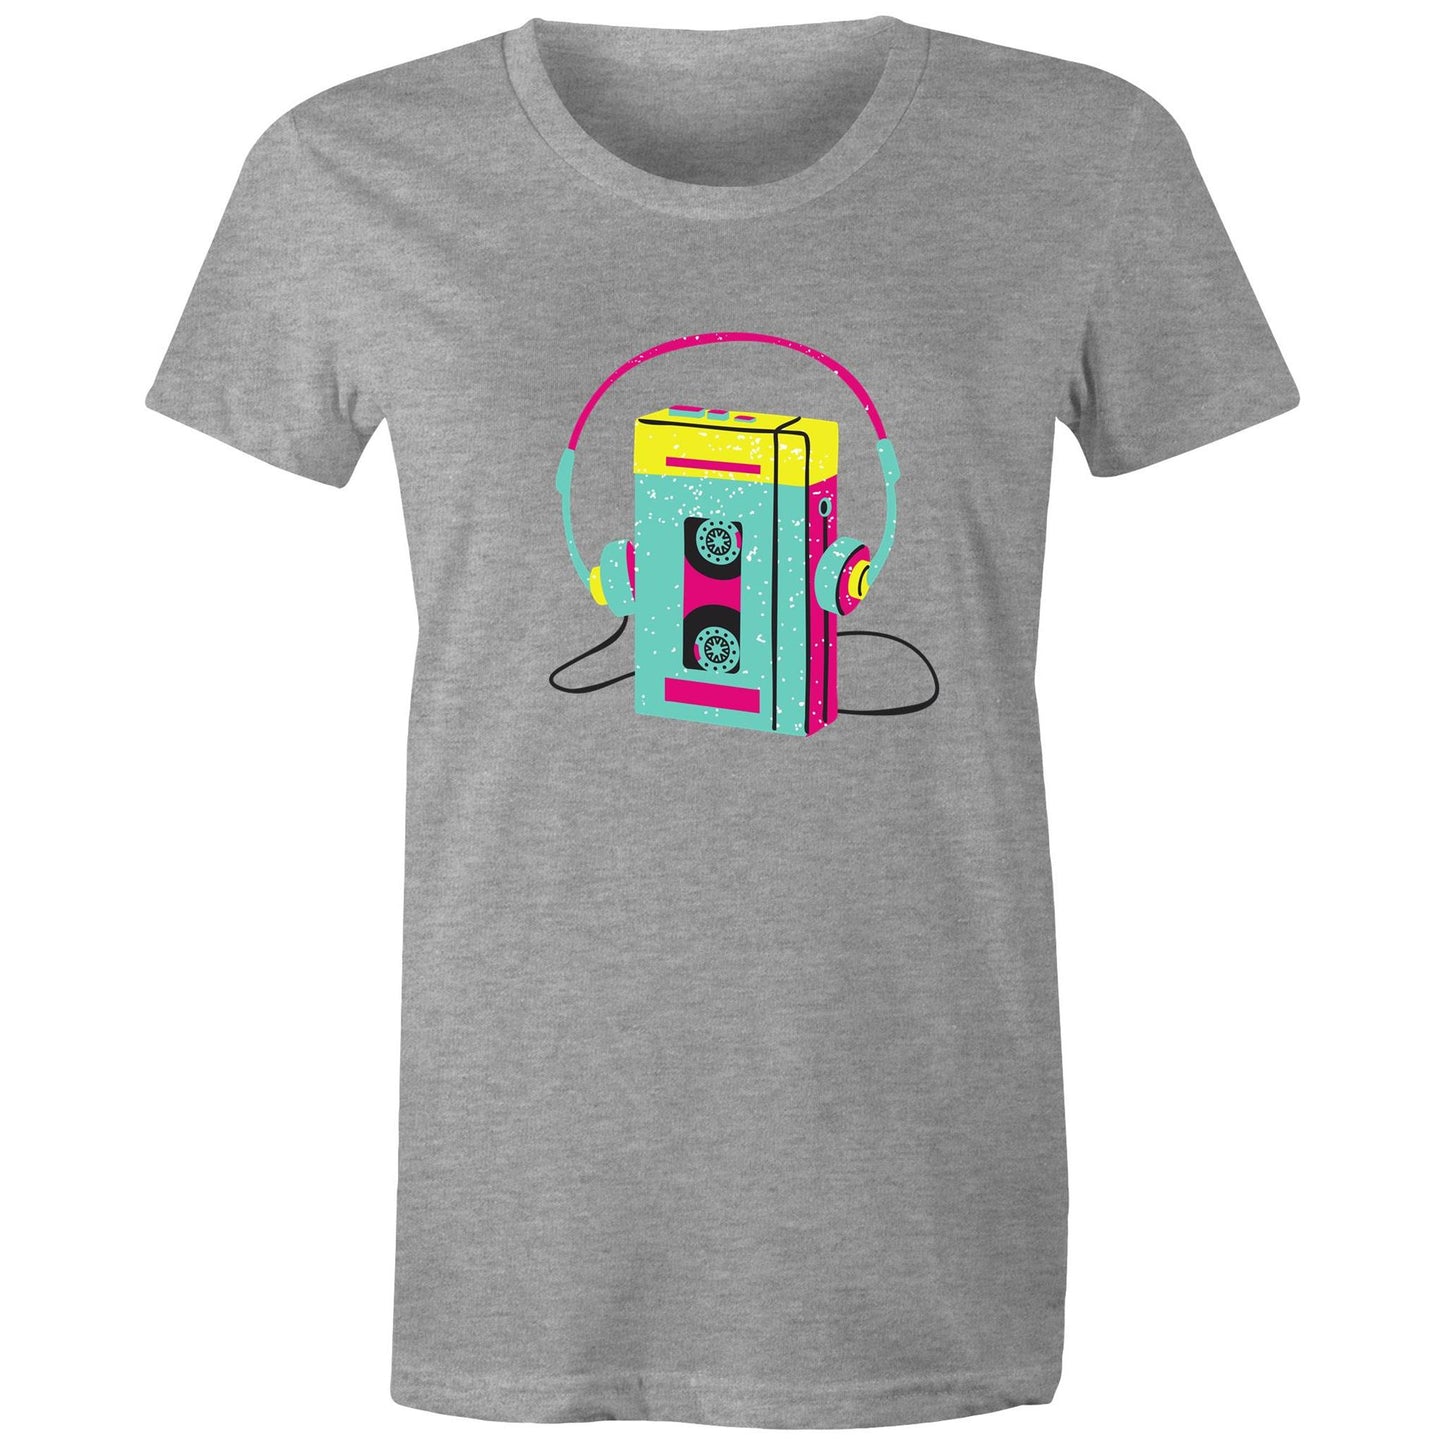 Wired For Sound, Music Player - Womens T-shirt Grey Marle Womens T-shirt Music Retro Womens